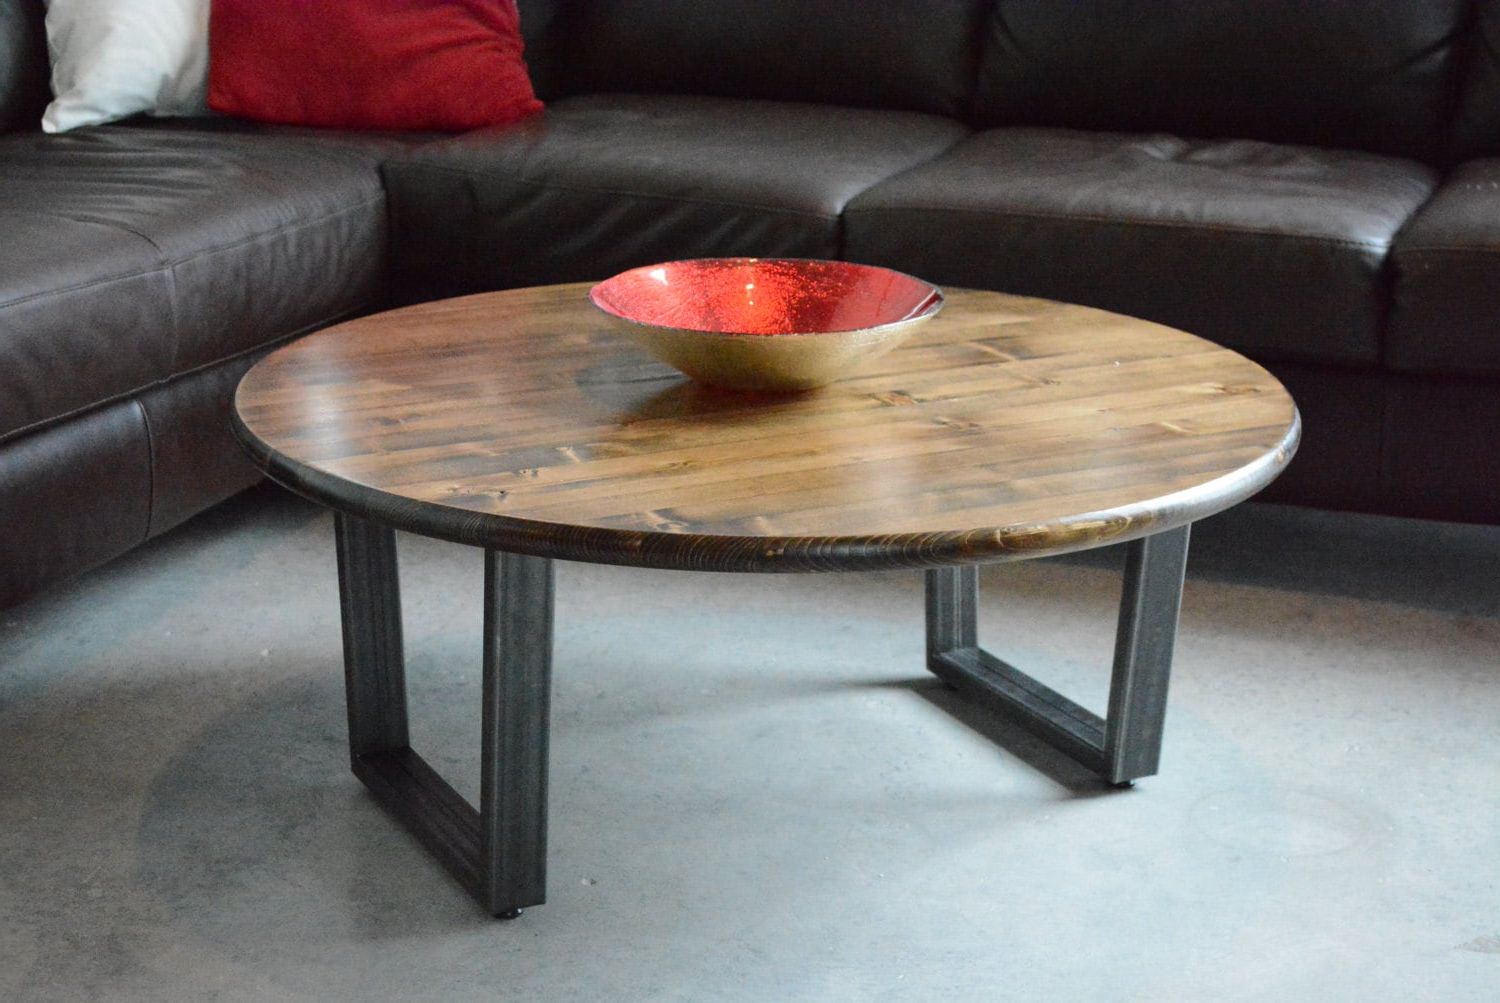 Popular 36 Round Coffee Table With Steel Legsgroveandanchor On Etsy Throughout Coffee Tables With Metal Legs (View 11 of 15)